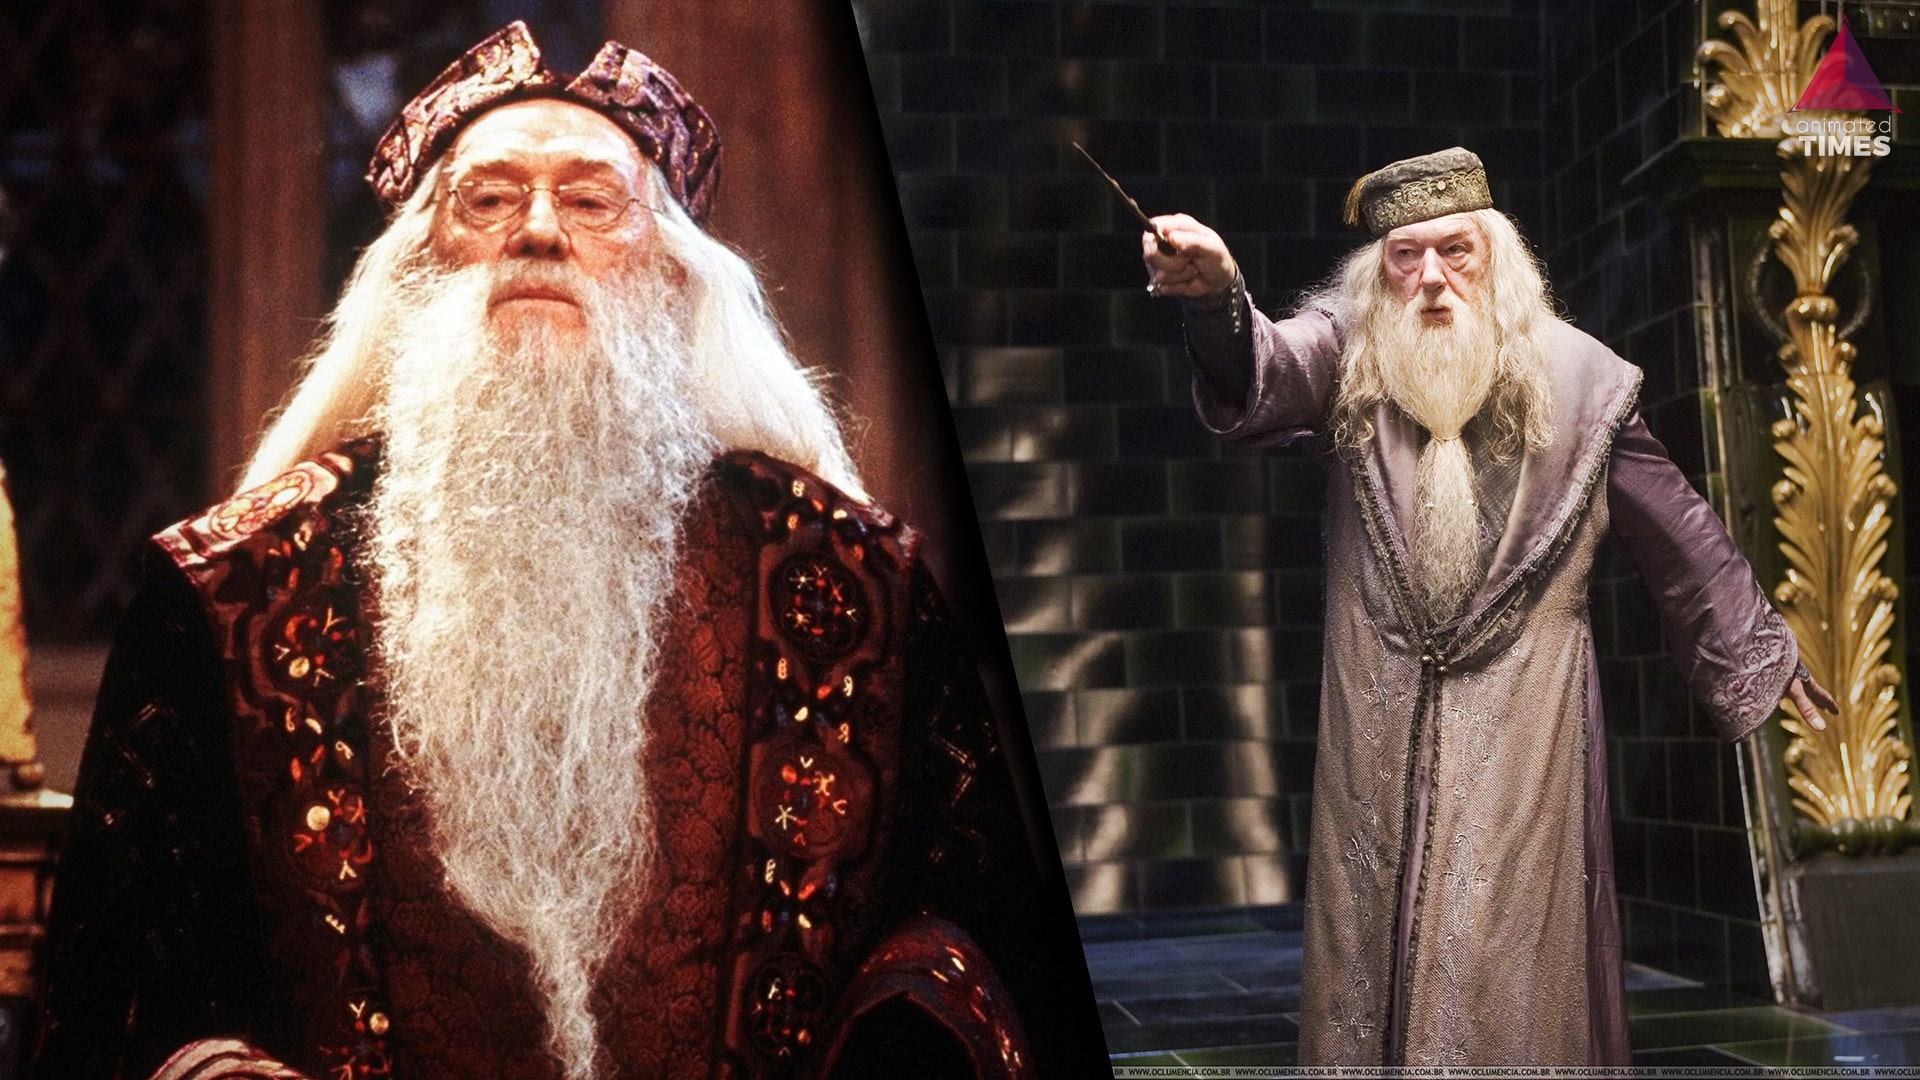 Harry Potter: 5 Reasons We Love Harris’ Dumbledore, And 5 Why It’s Gambon.